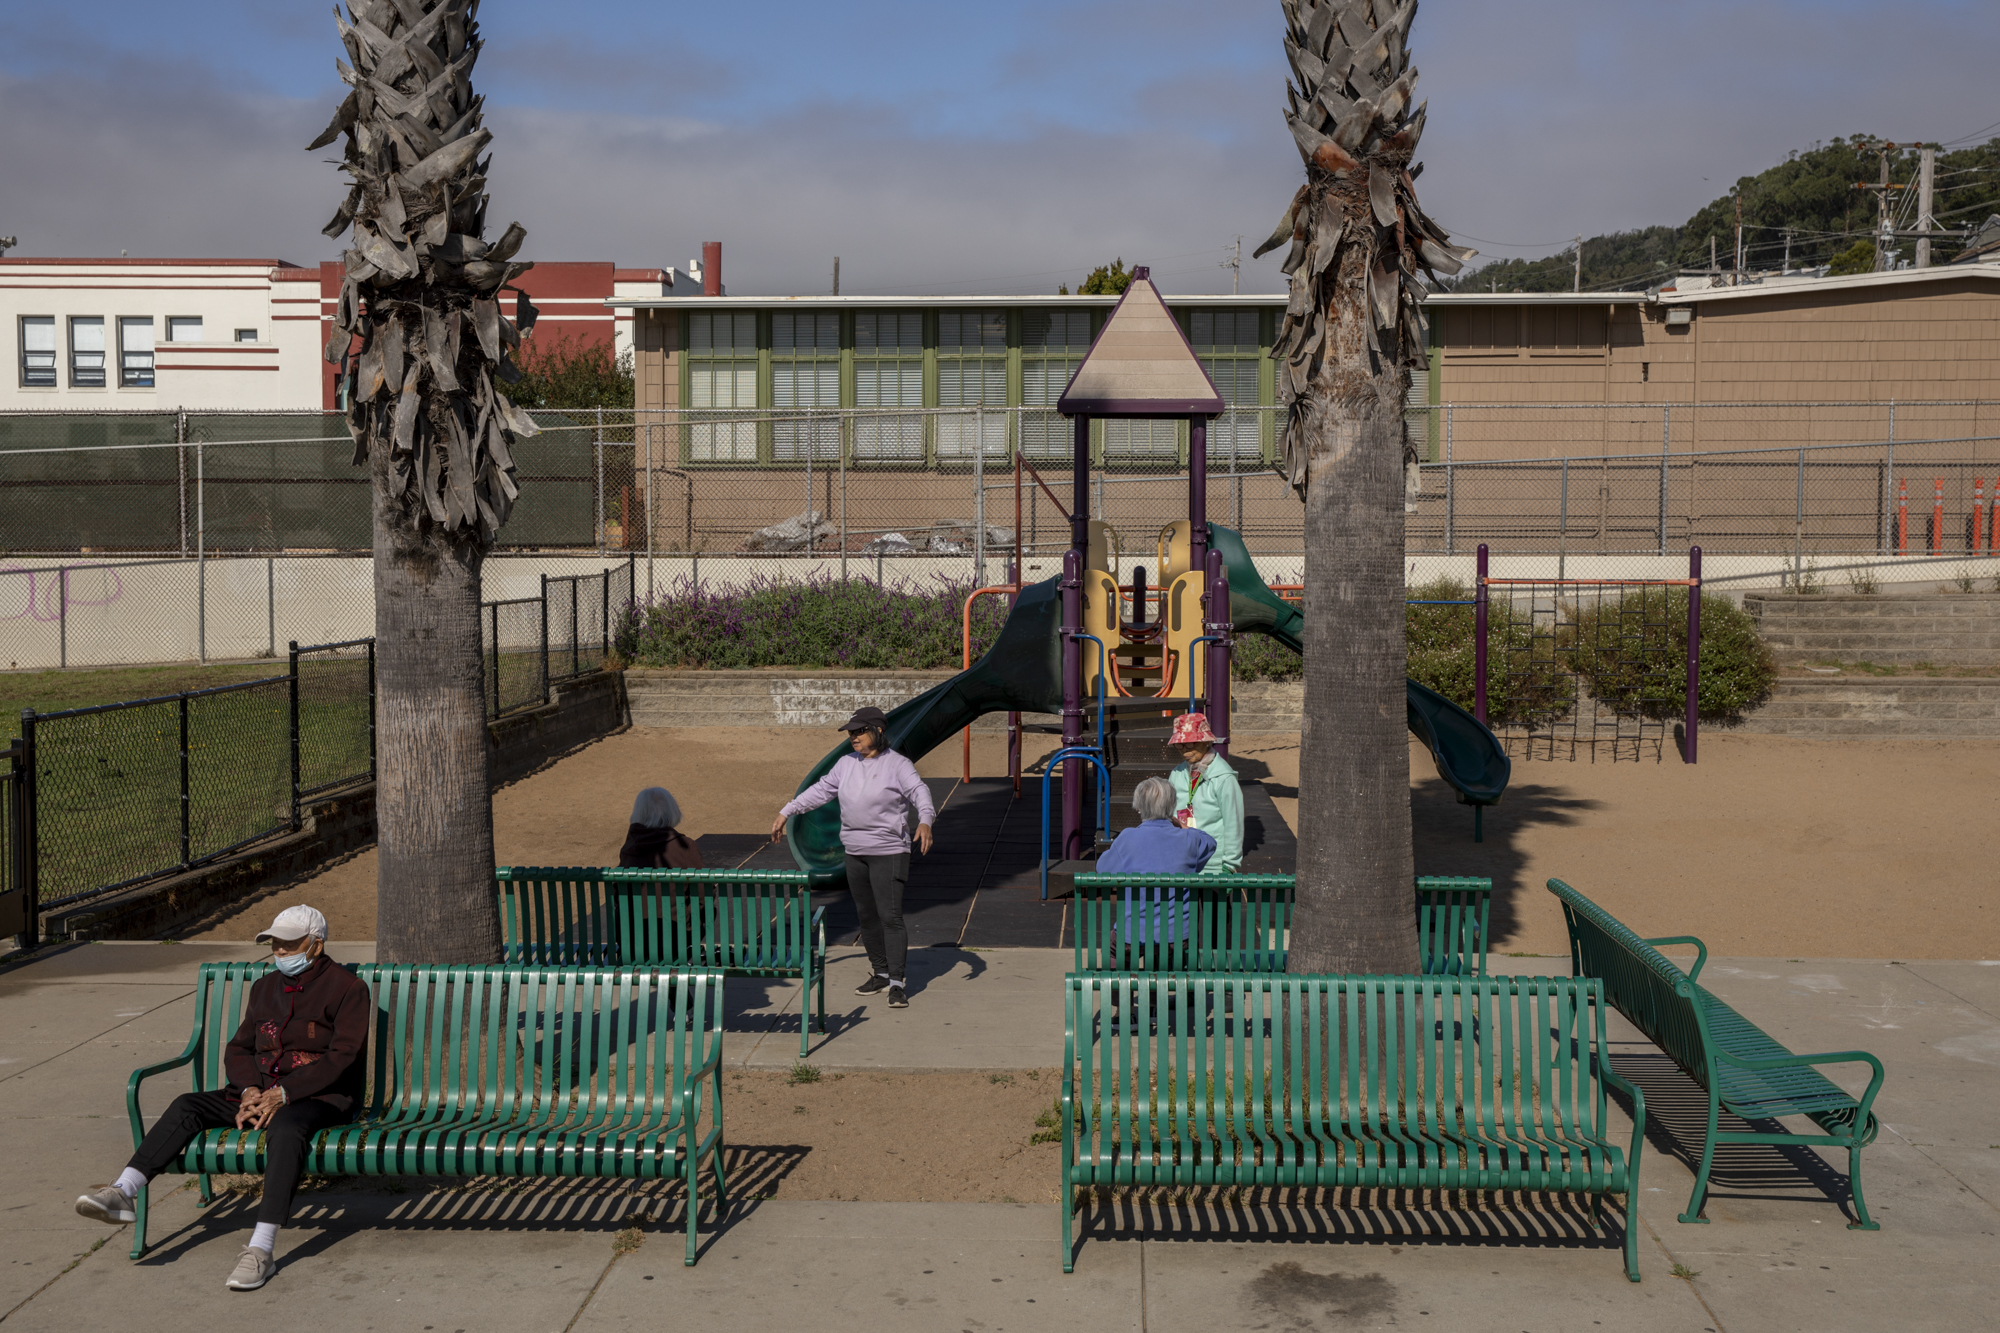 Five people congregate around park benches in front of a jungle gym in an outdoor park.